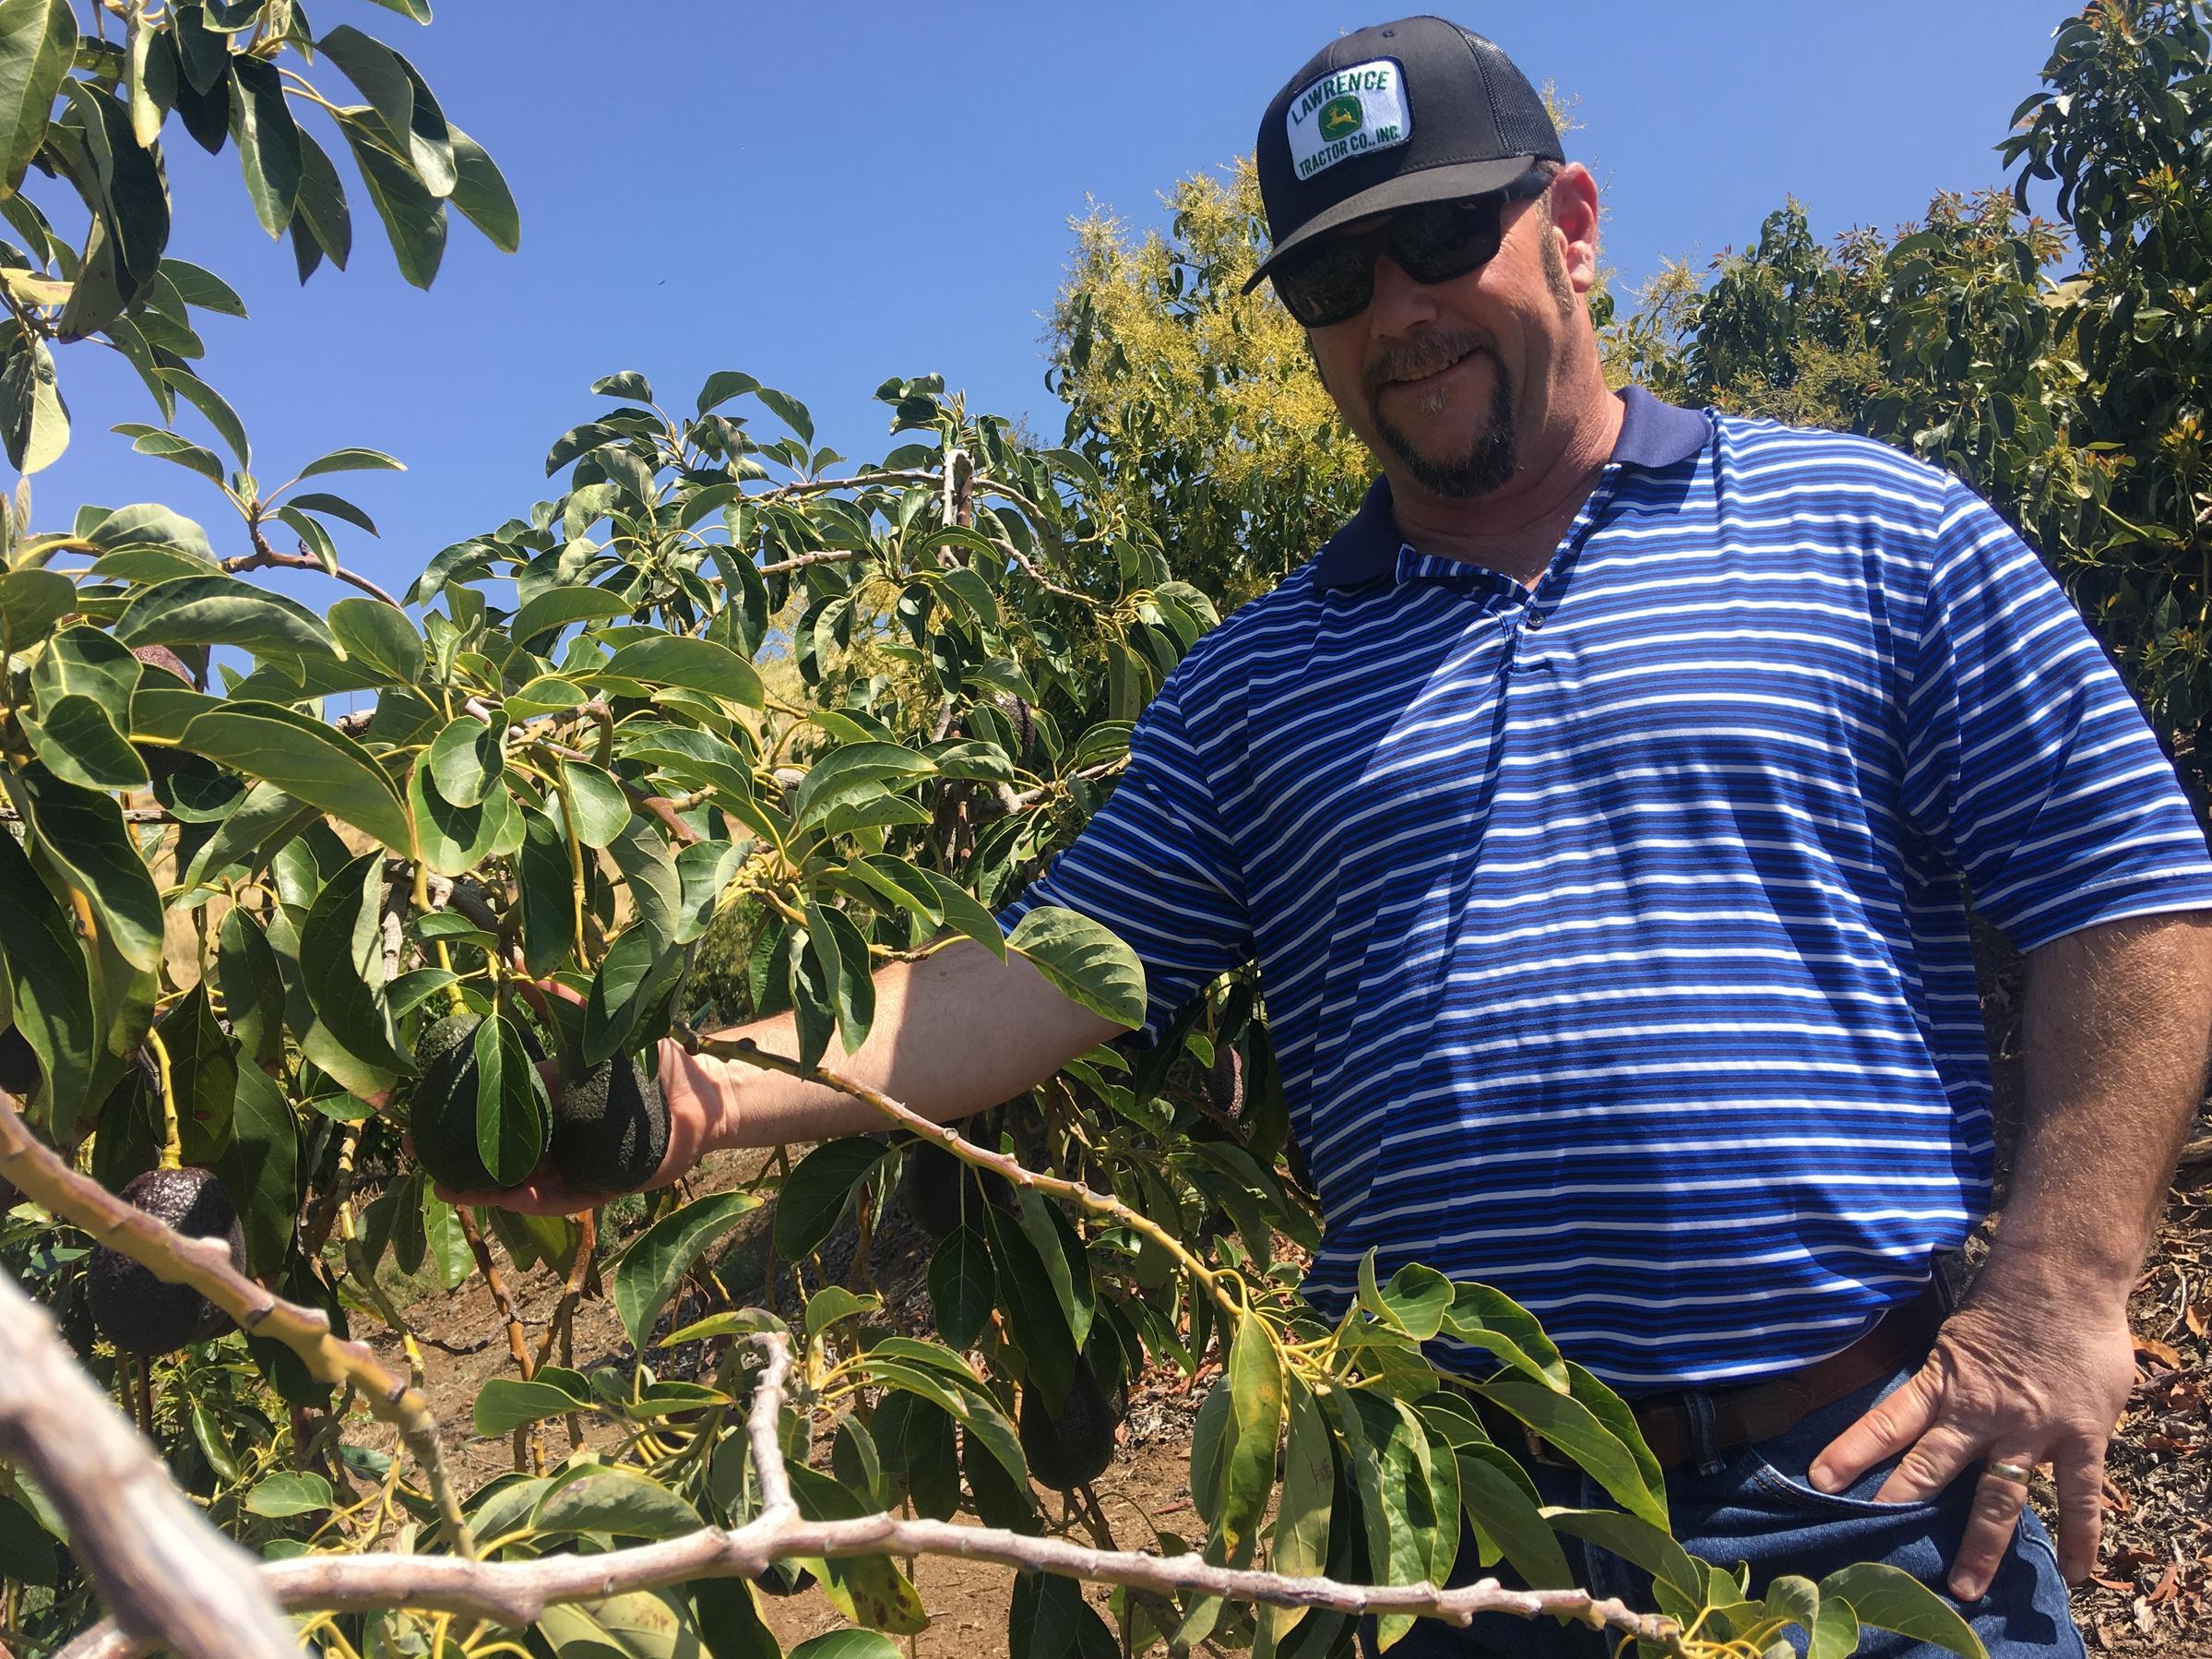 Jon Stearns says that as an avocado grower, he hopes new varieties come on the market.